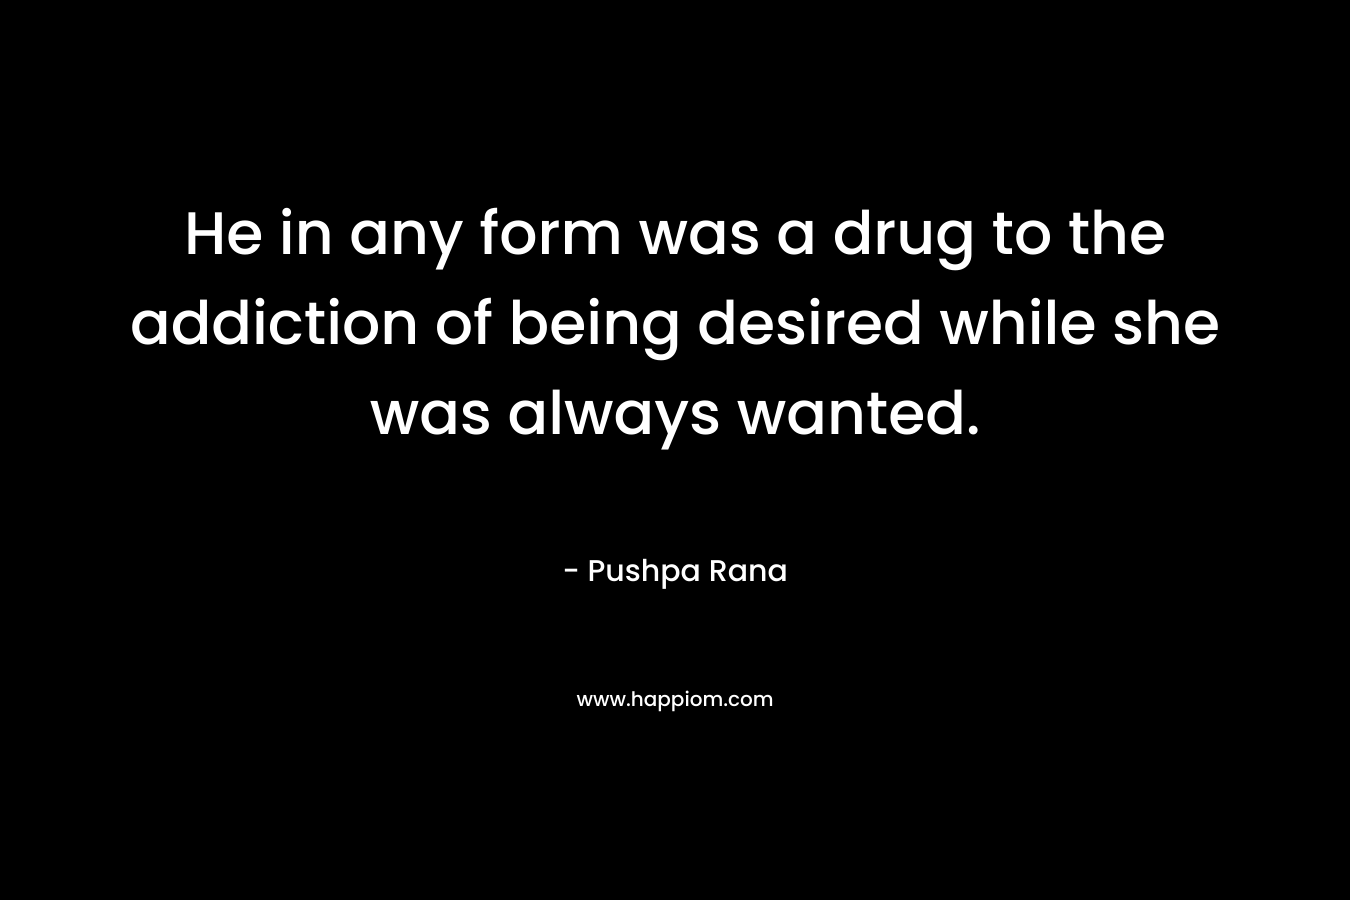 He in any form was a drug to the addiction of being desired while she was always wanted. – Pushpa Rana